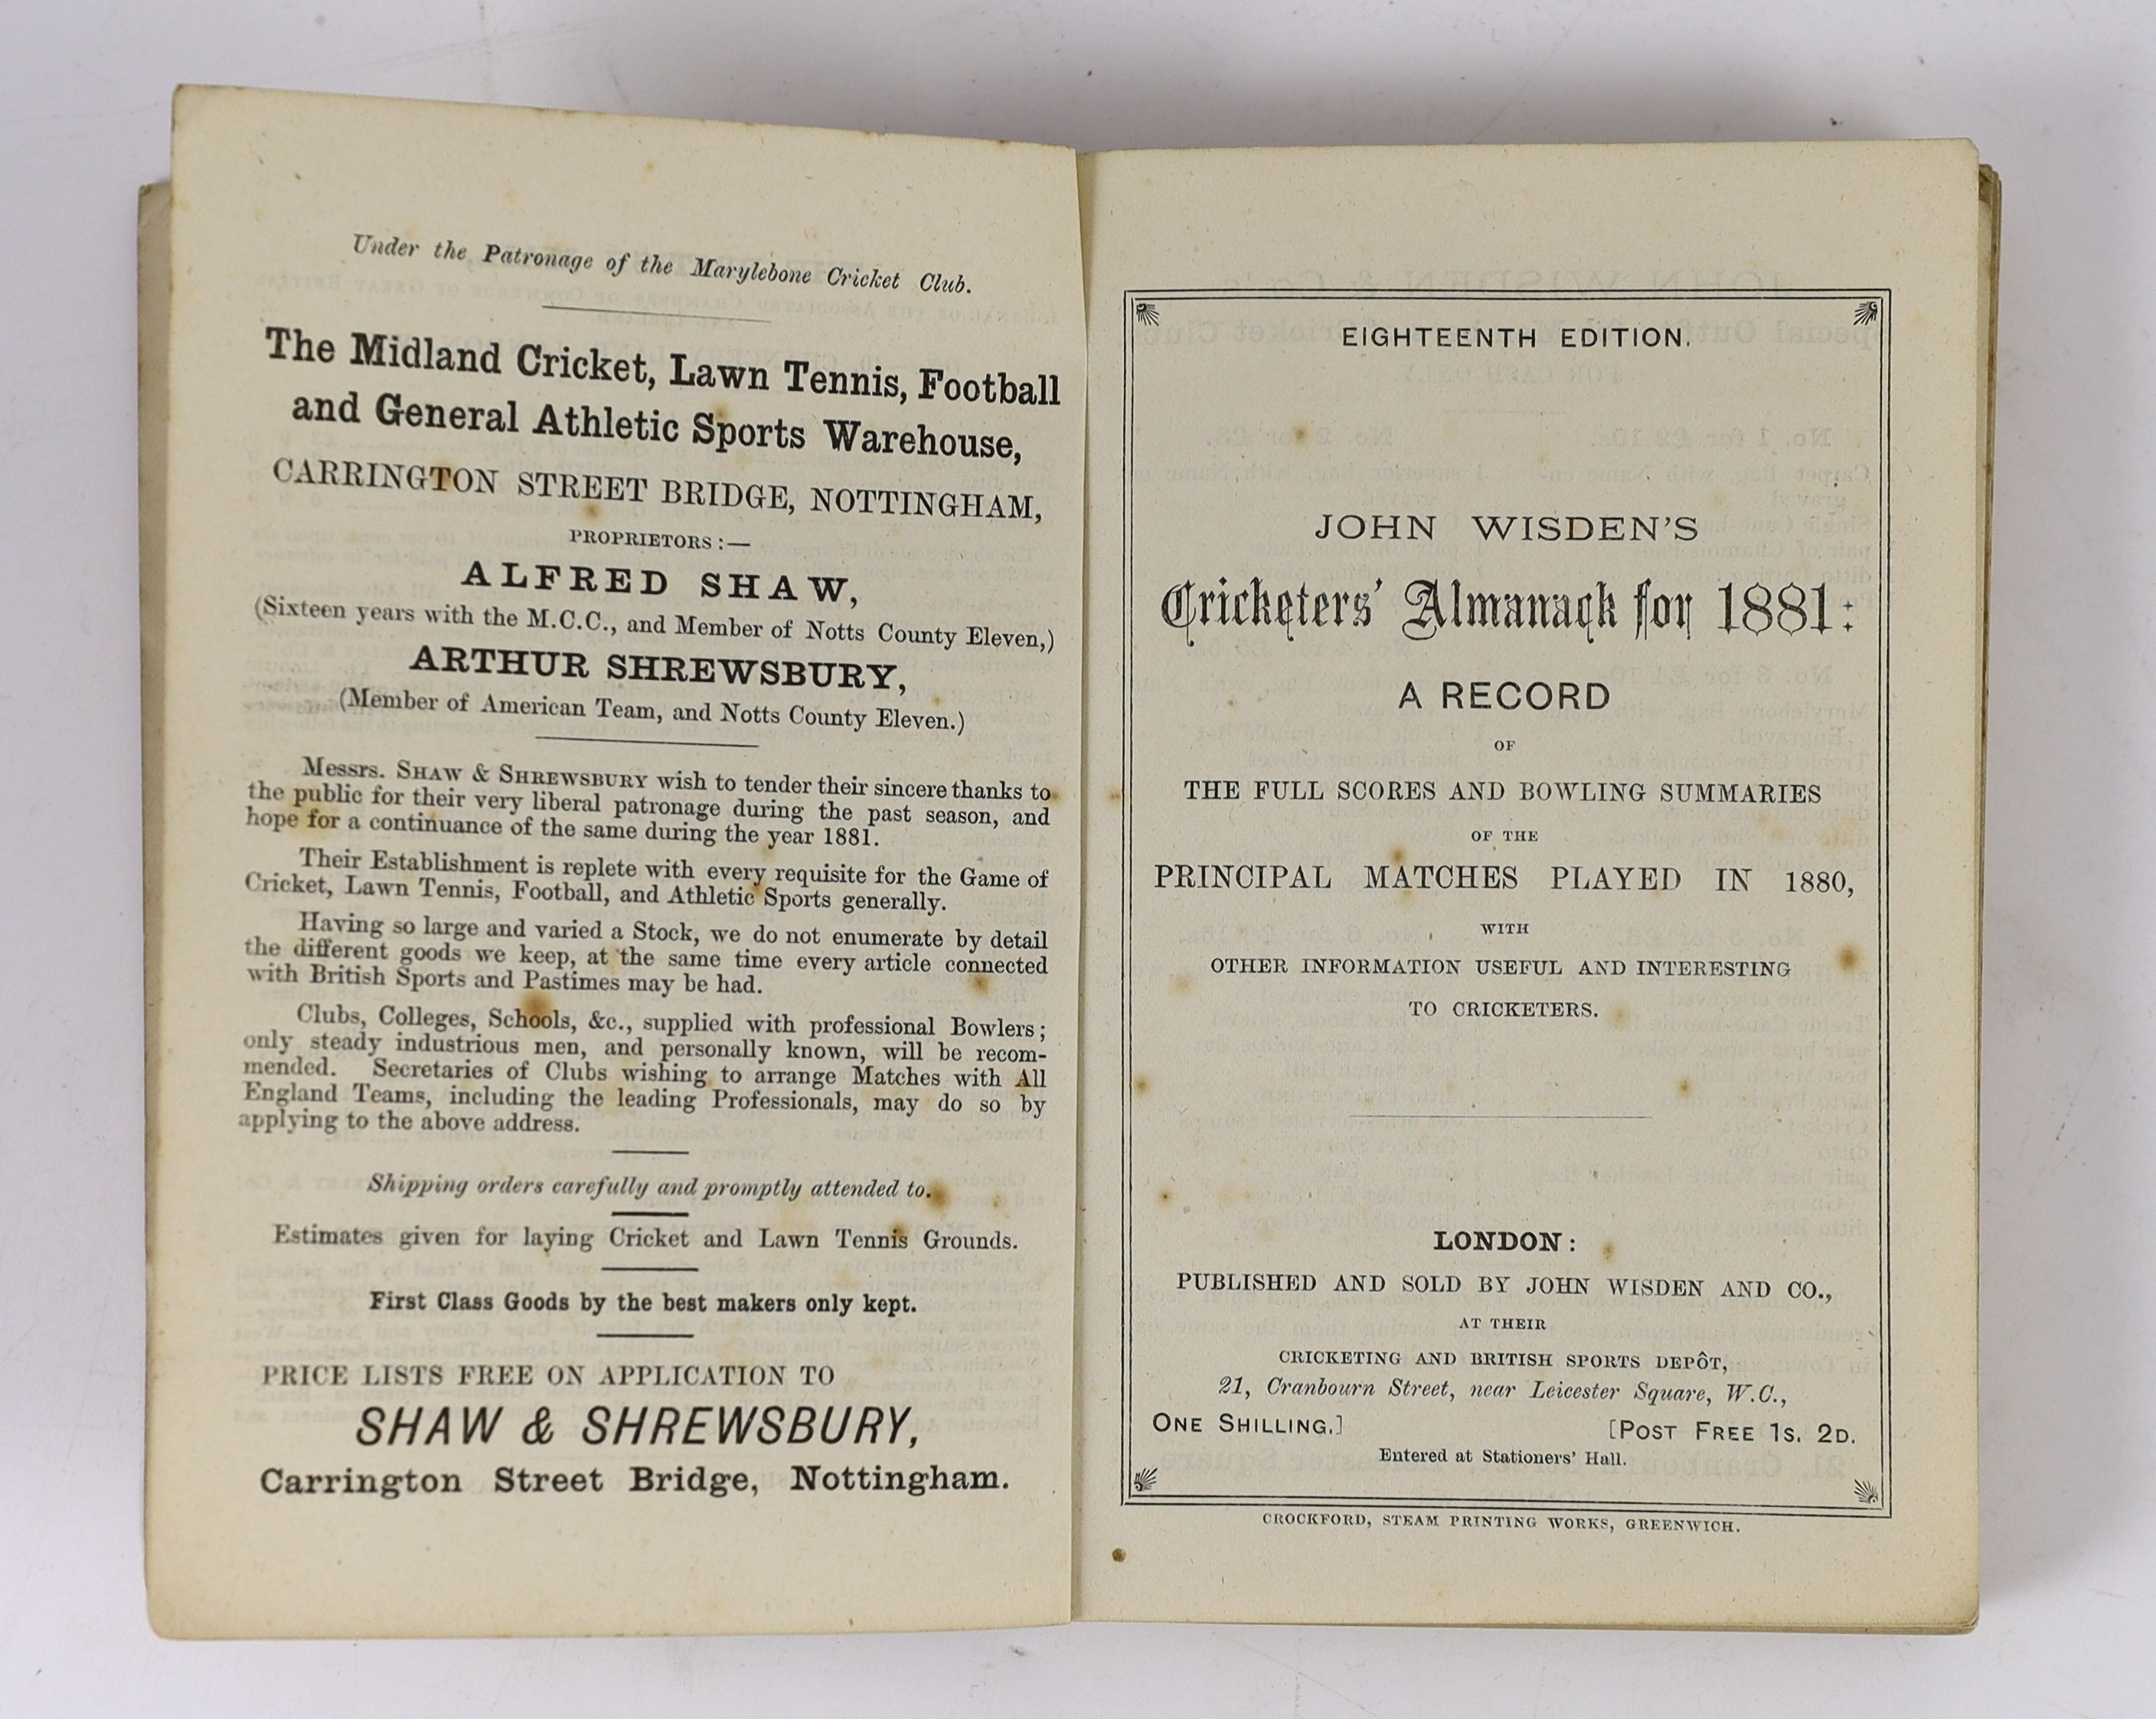 Wisden, John - Cricketers’ Almanack for 1881, 18th edition, original paper wrappers, tears to spine, spotting to endpapers.